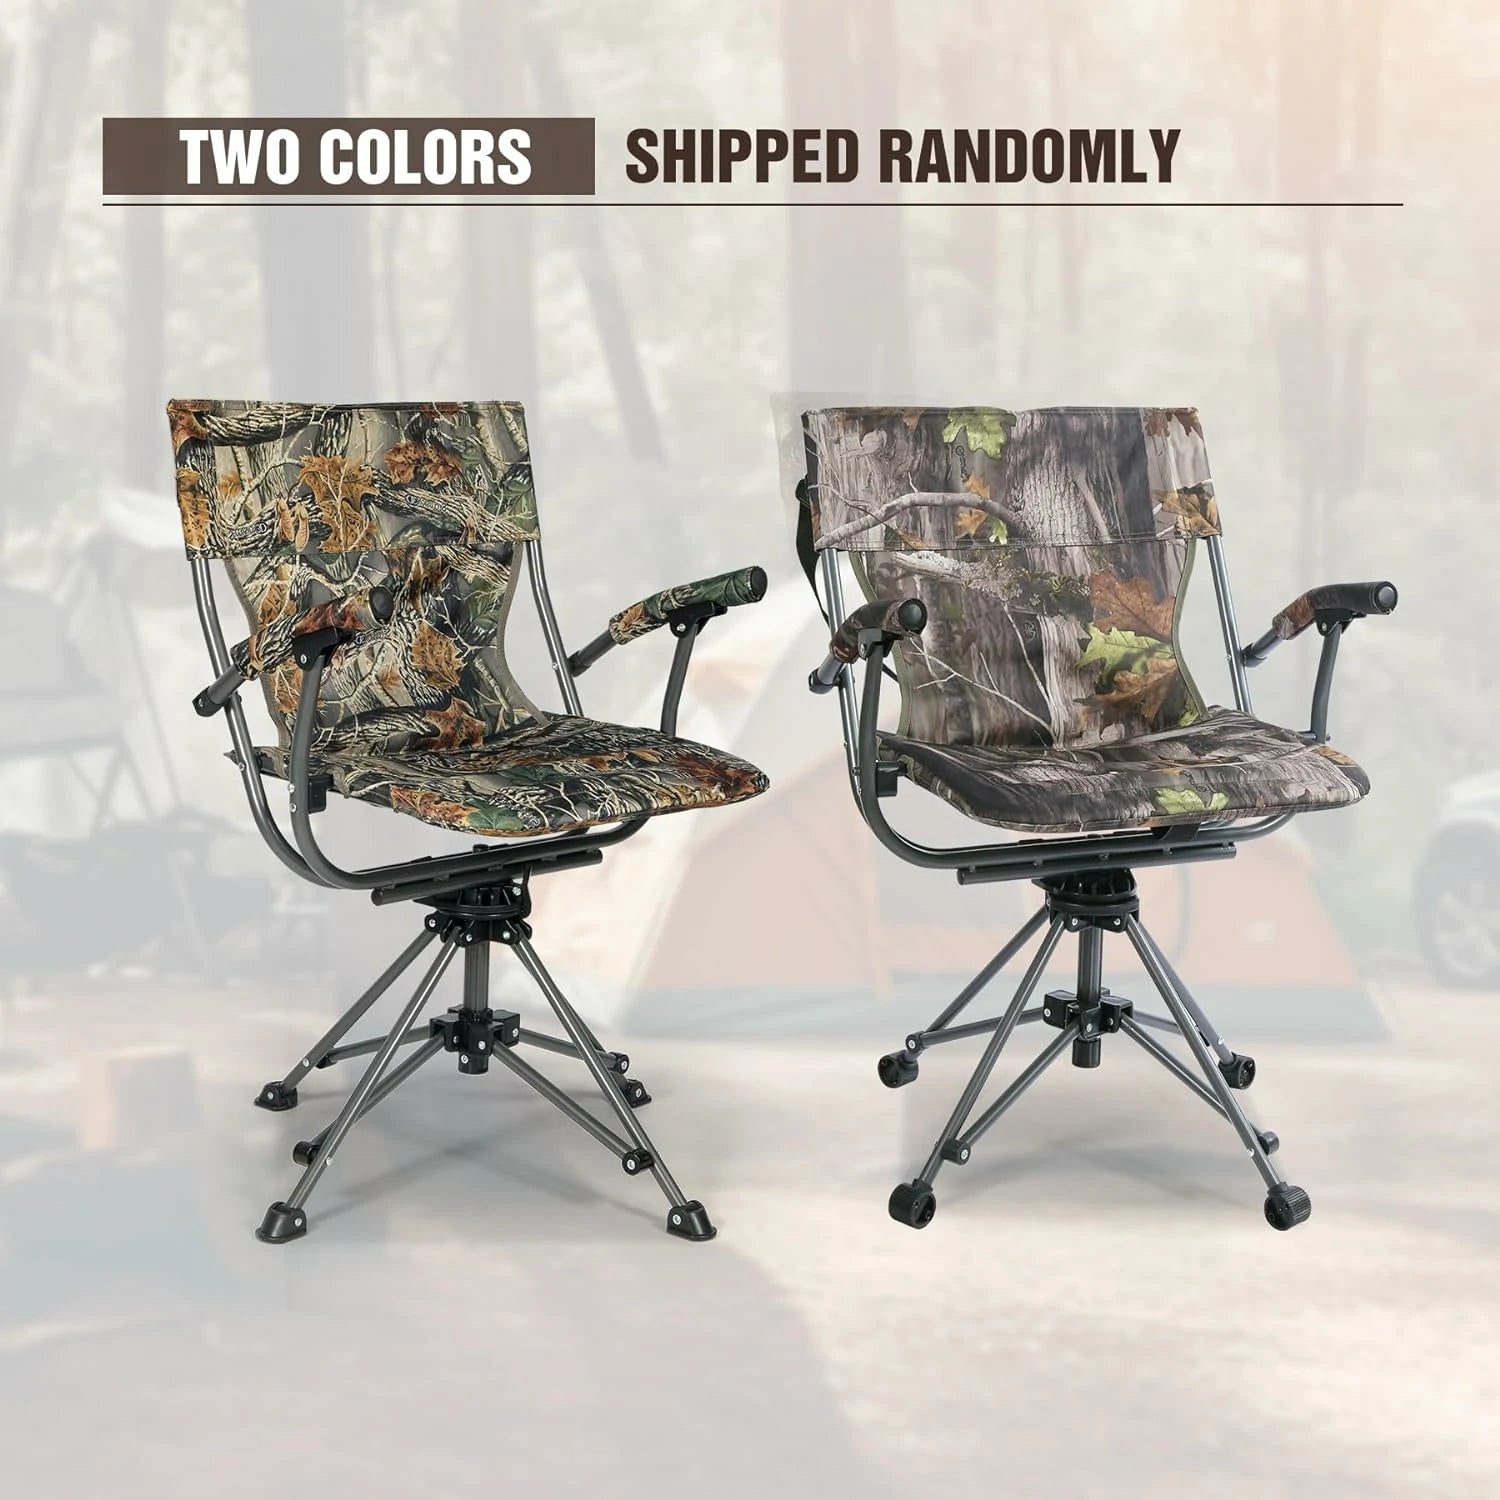 REDCAMP 360 Degree Swivel Camo Hunting Chair for Blinds